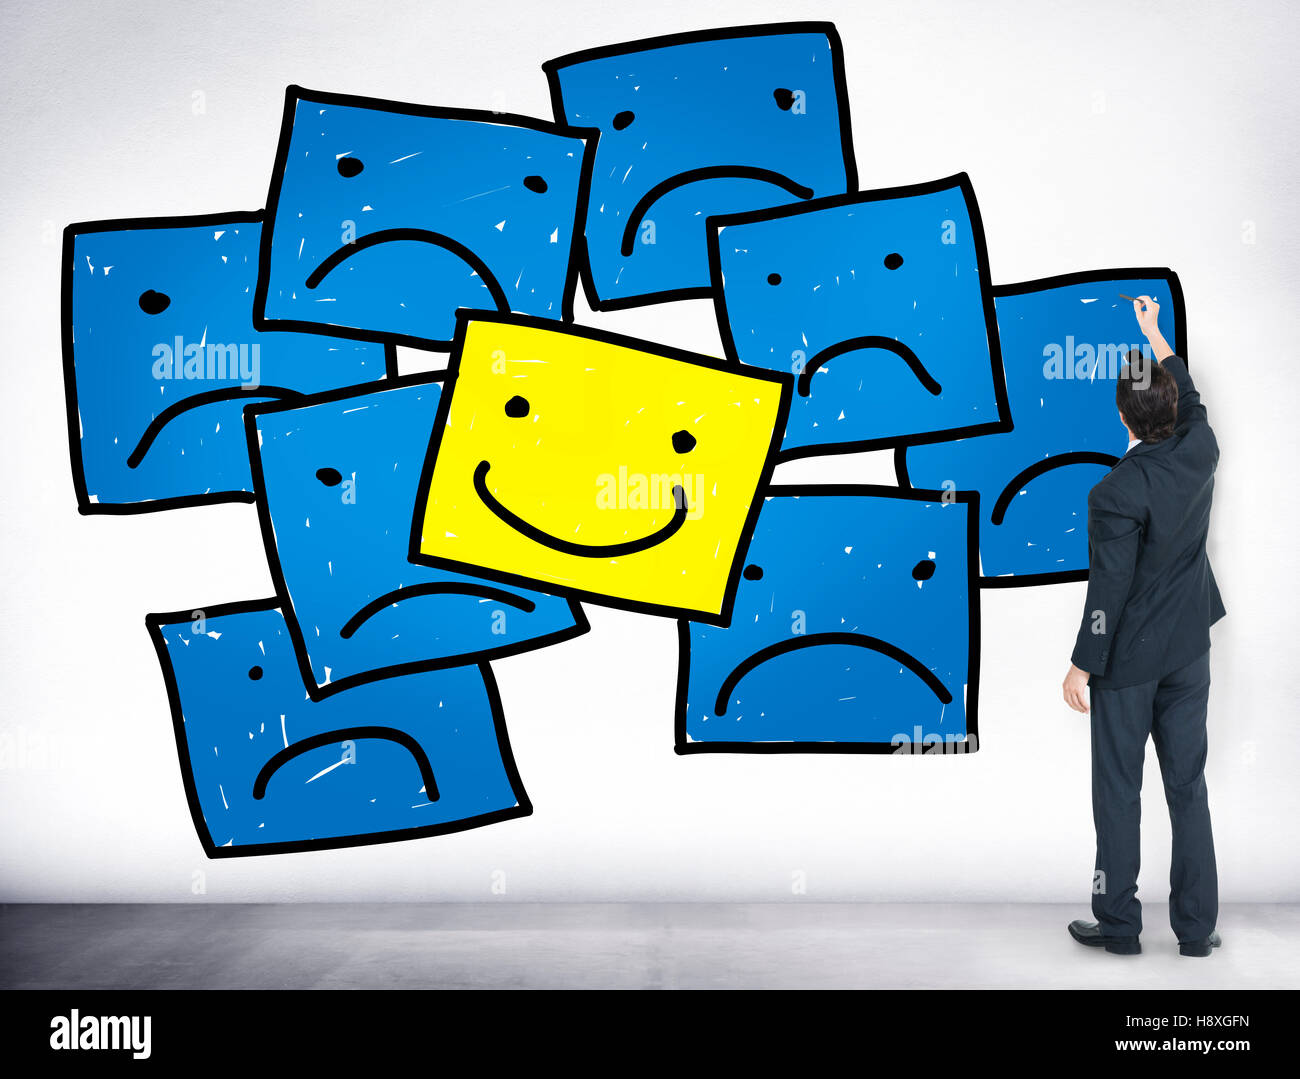 Smiley Outstanding Positive Happiness Contrast Concept Stock Photo